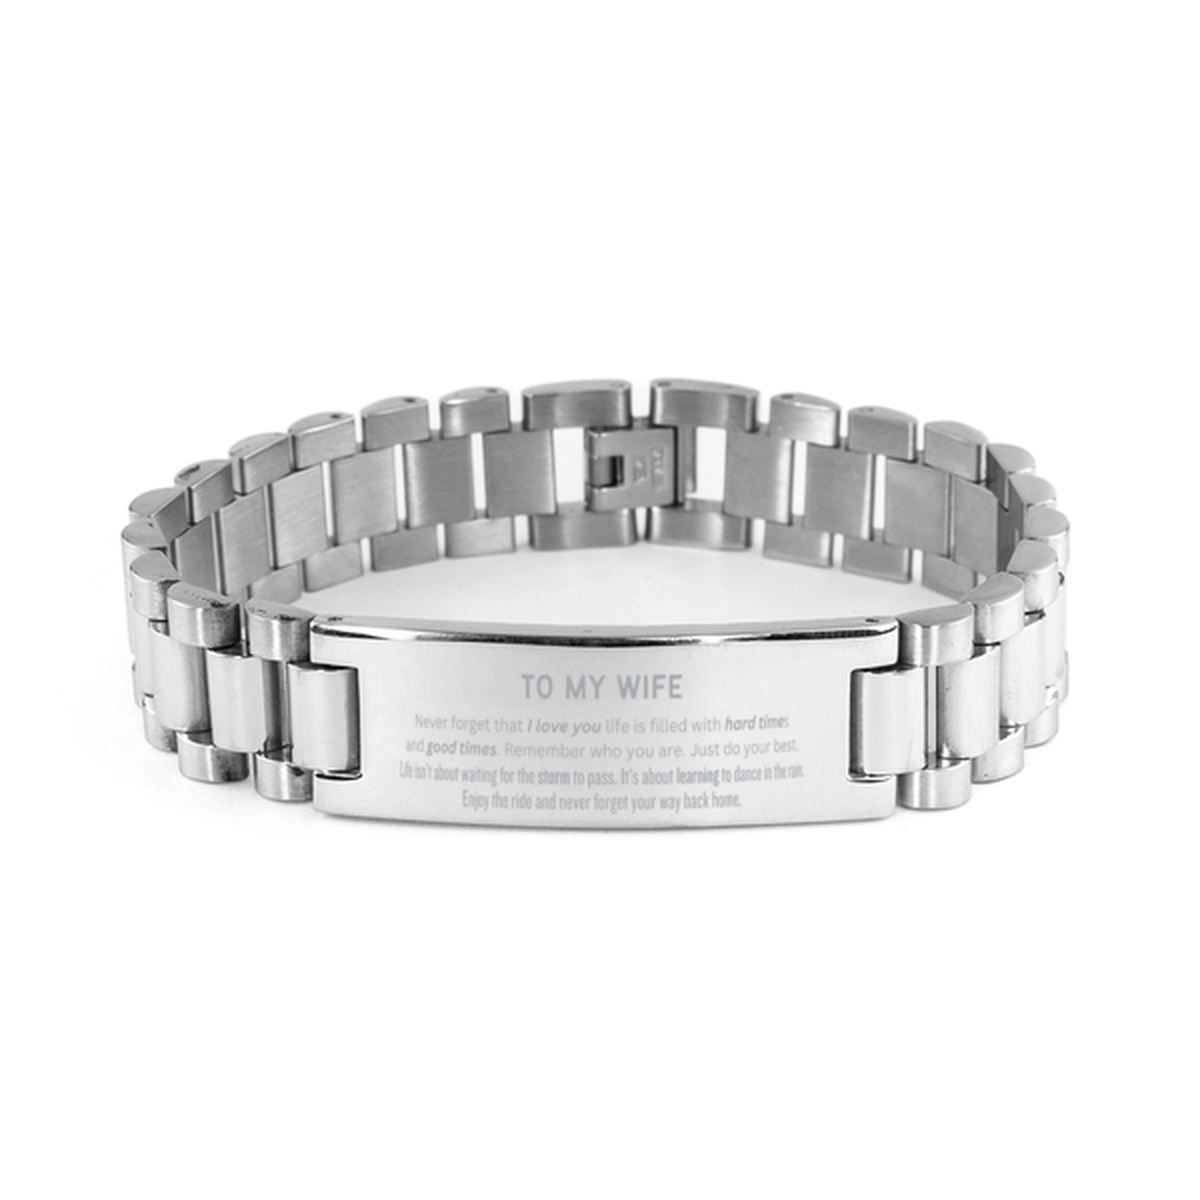 Christmas Wife Ladder Stainless Steel Bracelet Gifts, To My Wife Birthday Thank You Gifts For Wife, Graduation Unique Gifts For Wife To My Wife Never forget that I love you life is filled with hard times and good times. Remember who you are. Just do your